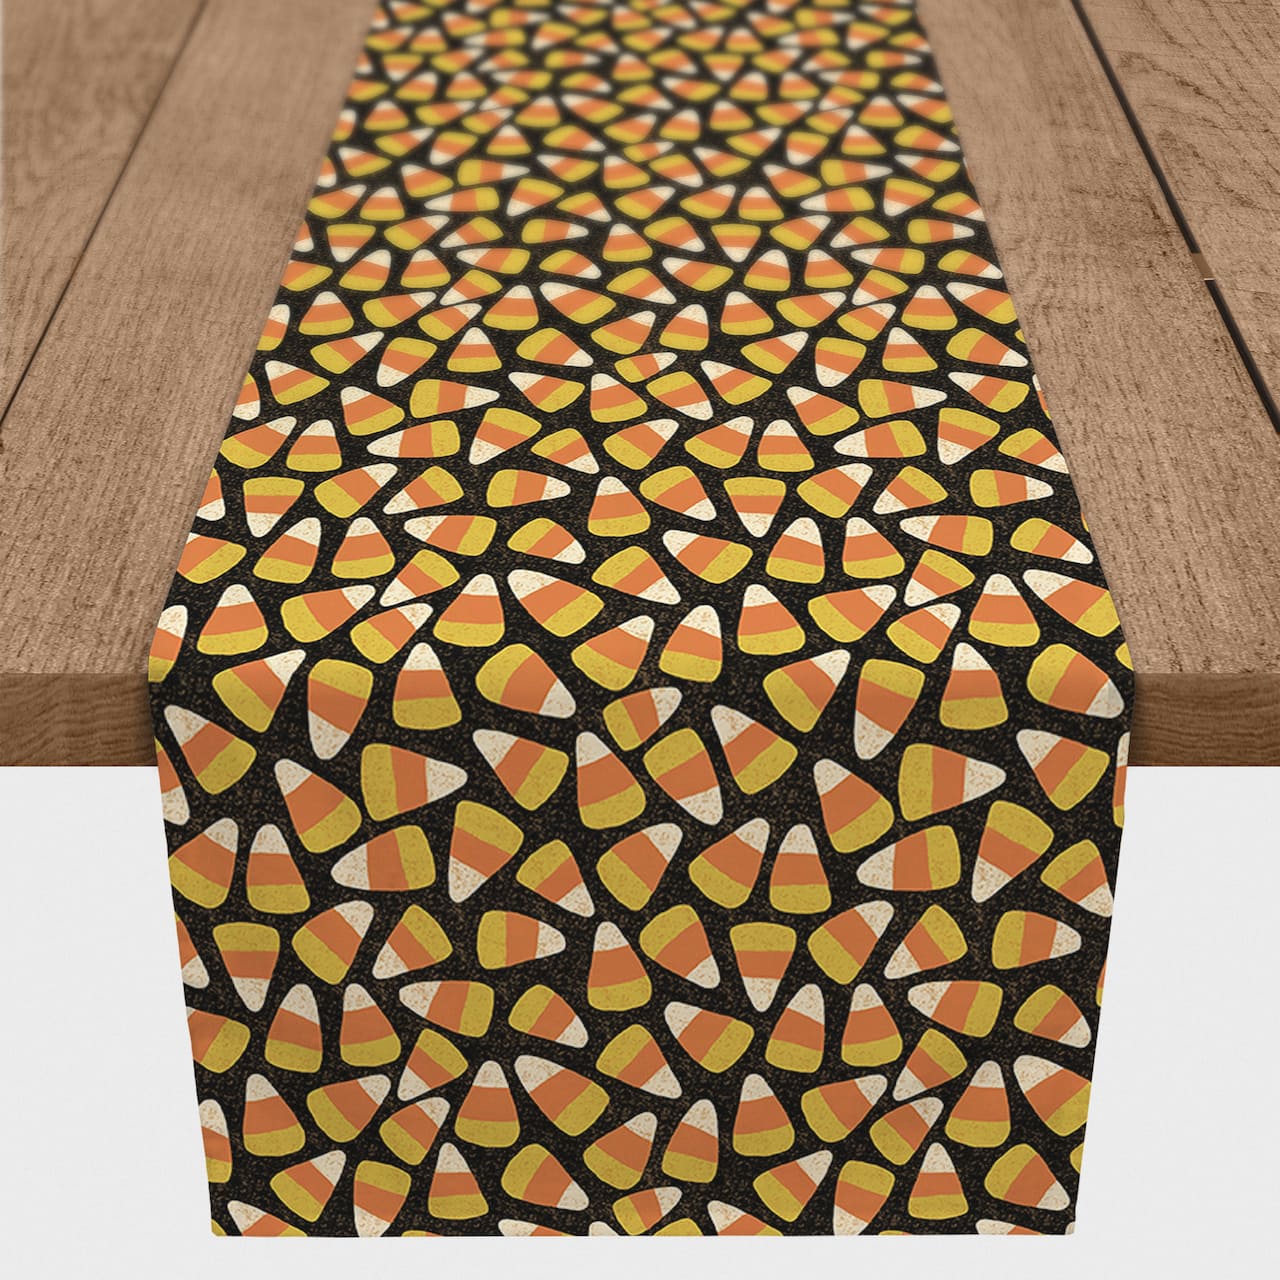 Candy Corn Pattern Table Runner